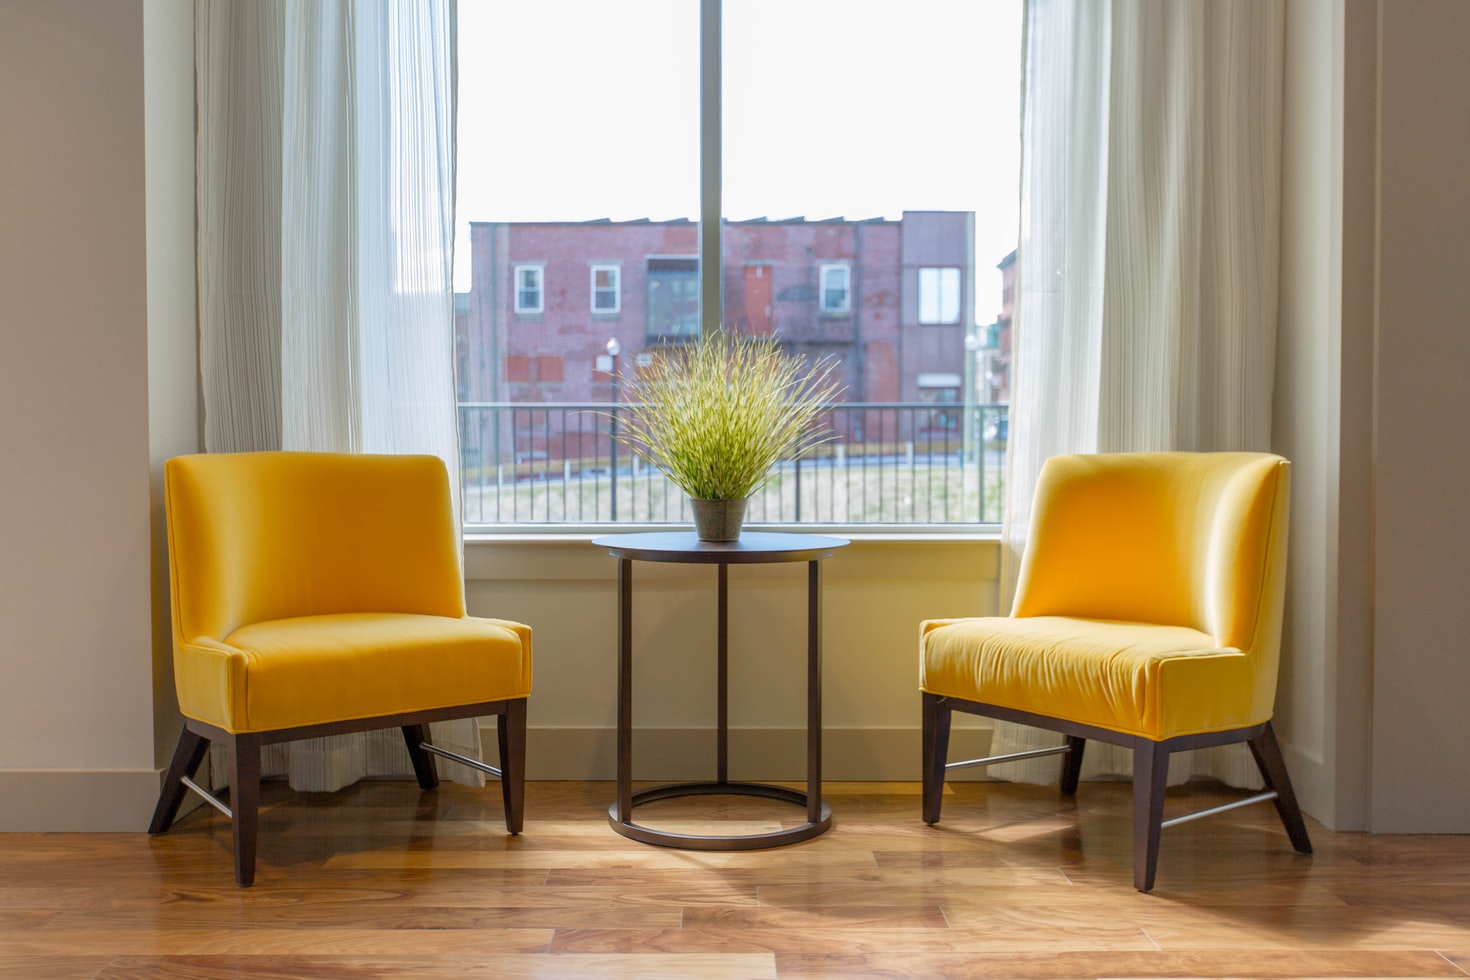 Yellow chairs in a common room of an office